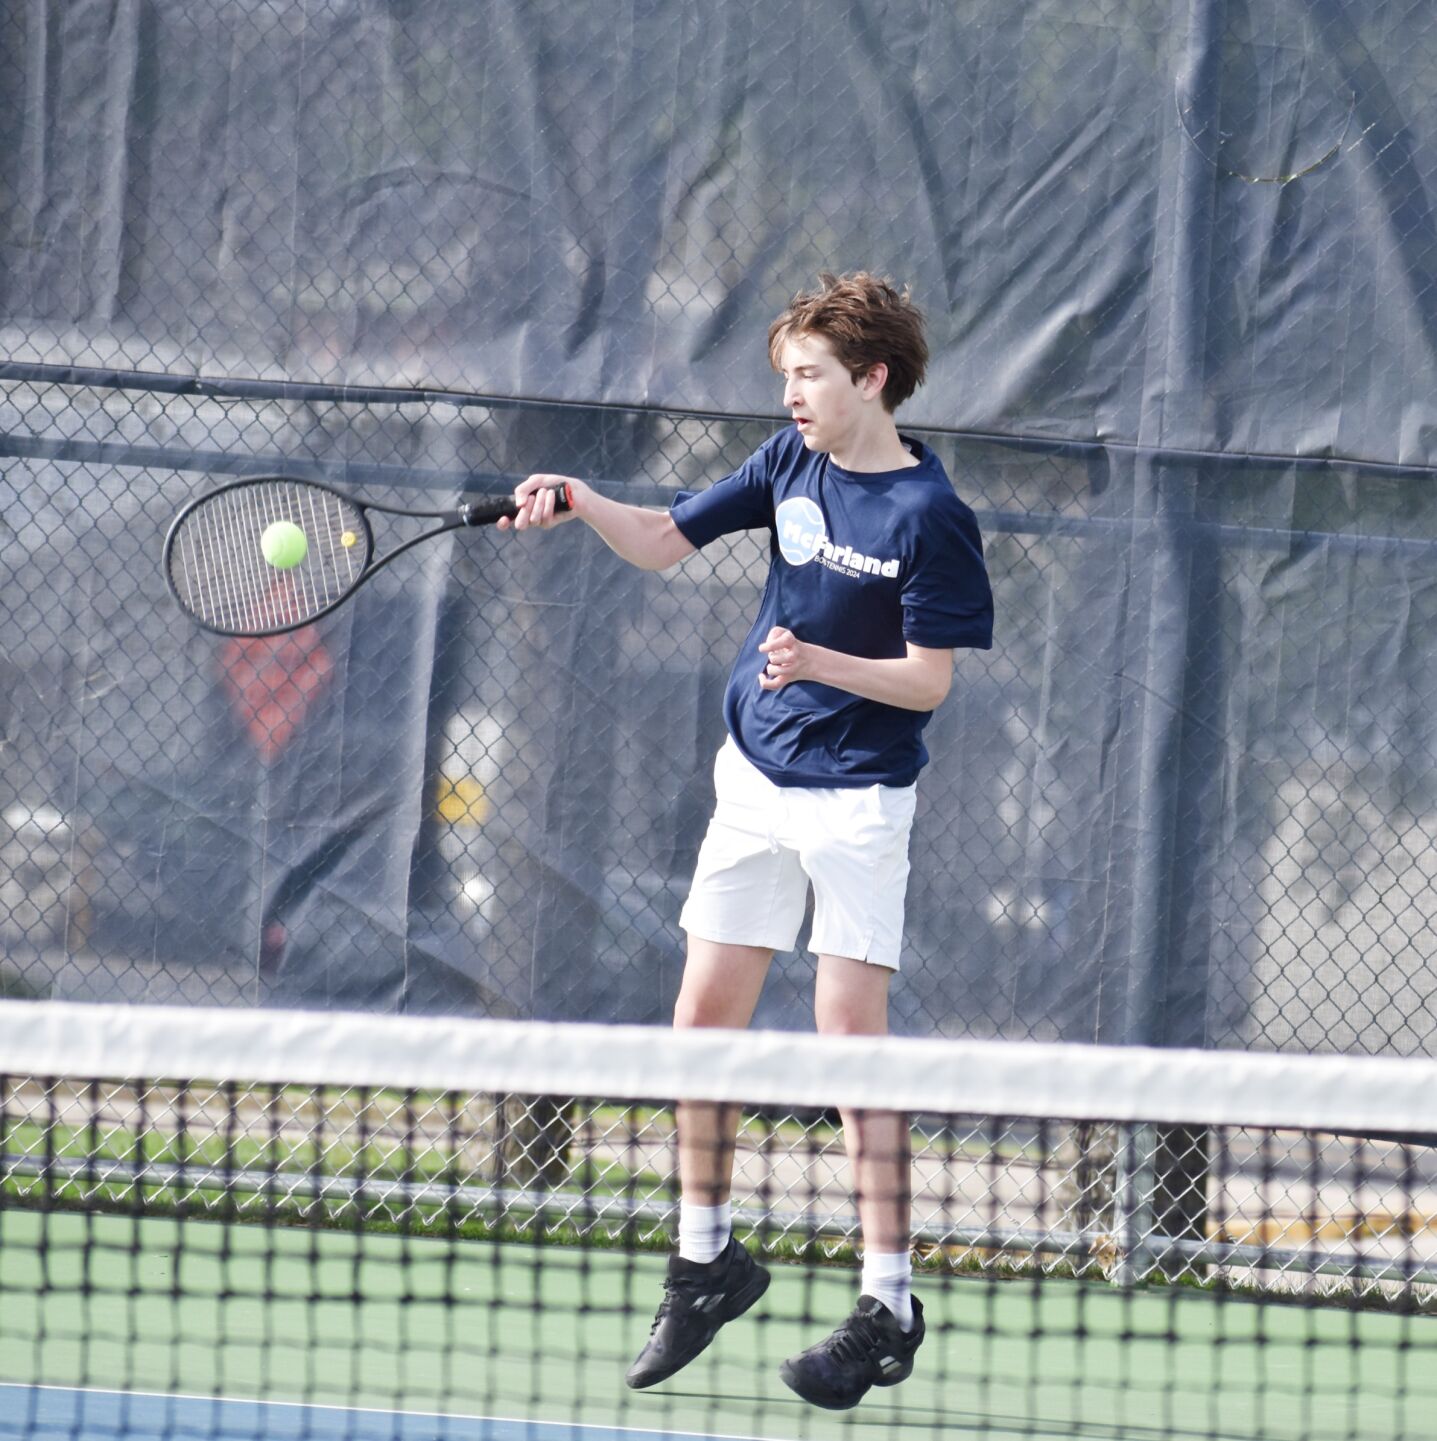 McFarland boys tennis wins two matches at Stoughton Invite, also score conference win over Portage; lose matches to Baraboo and Reedsburg